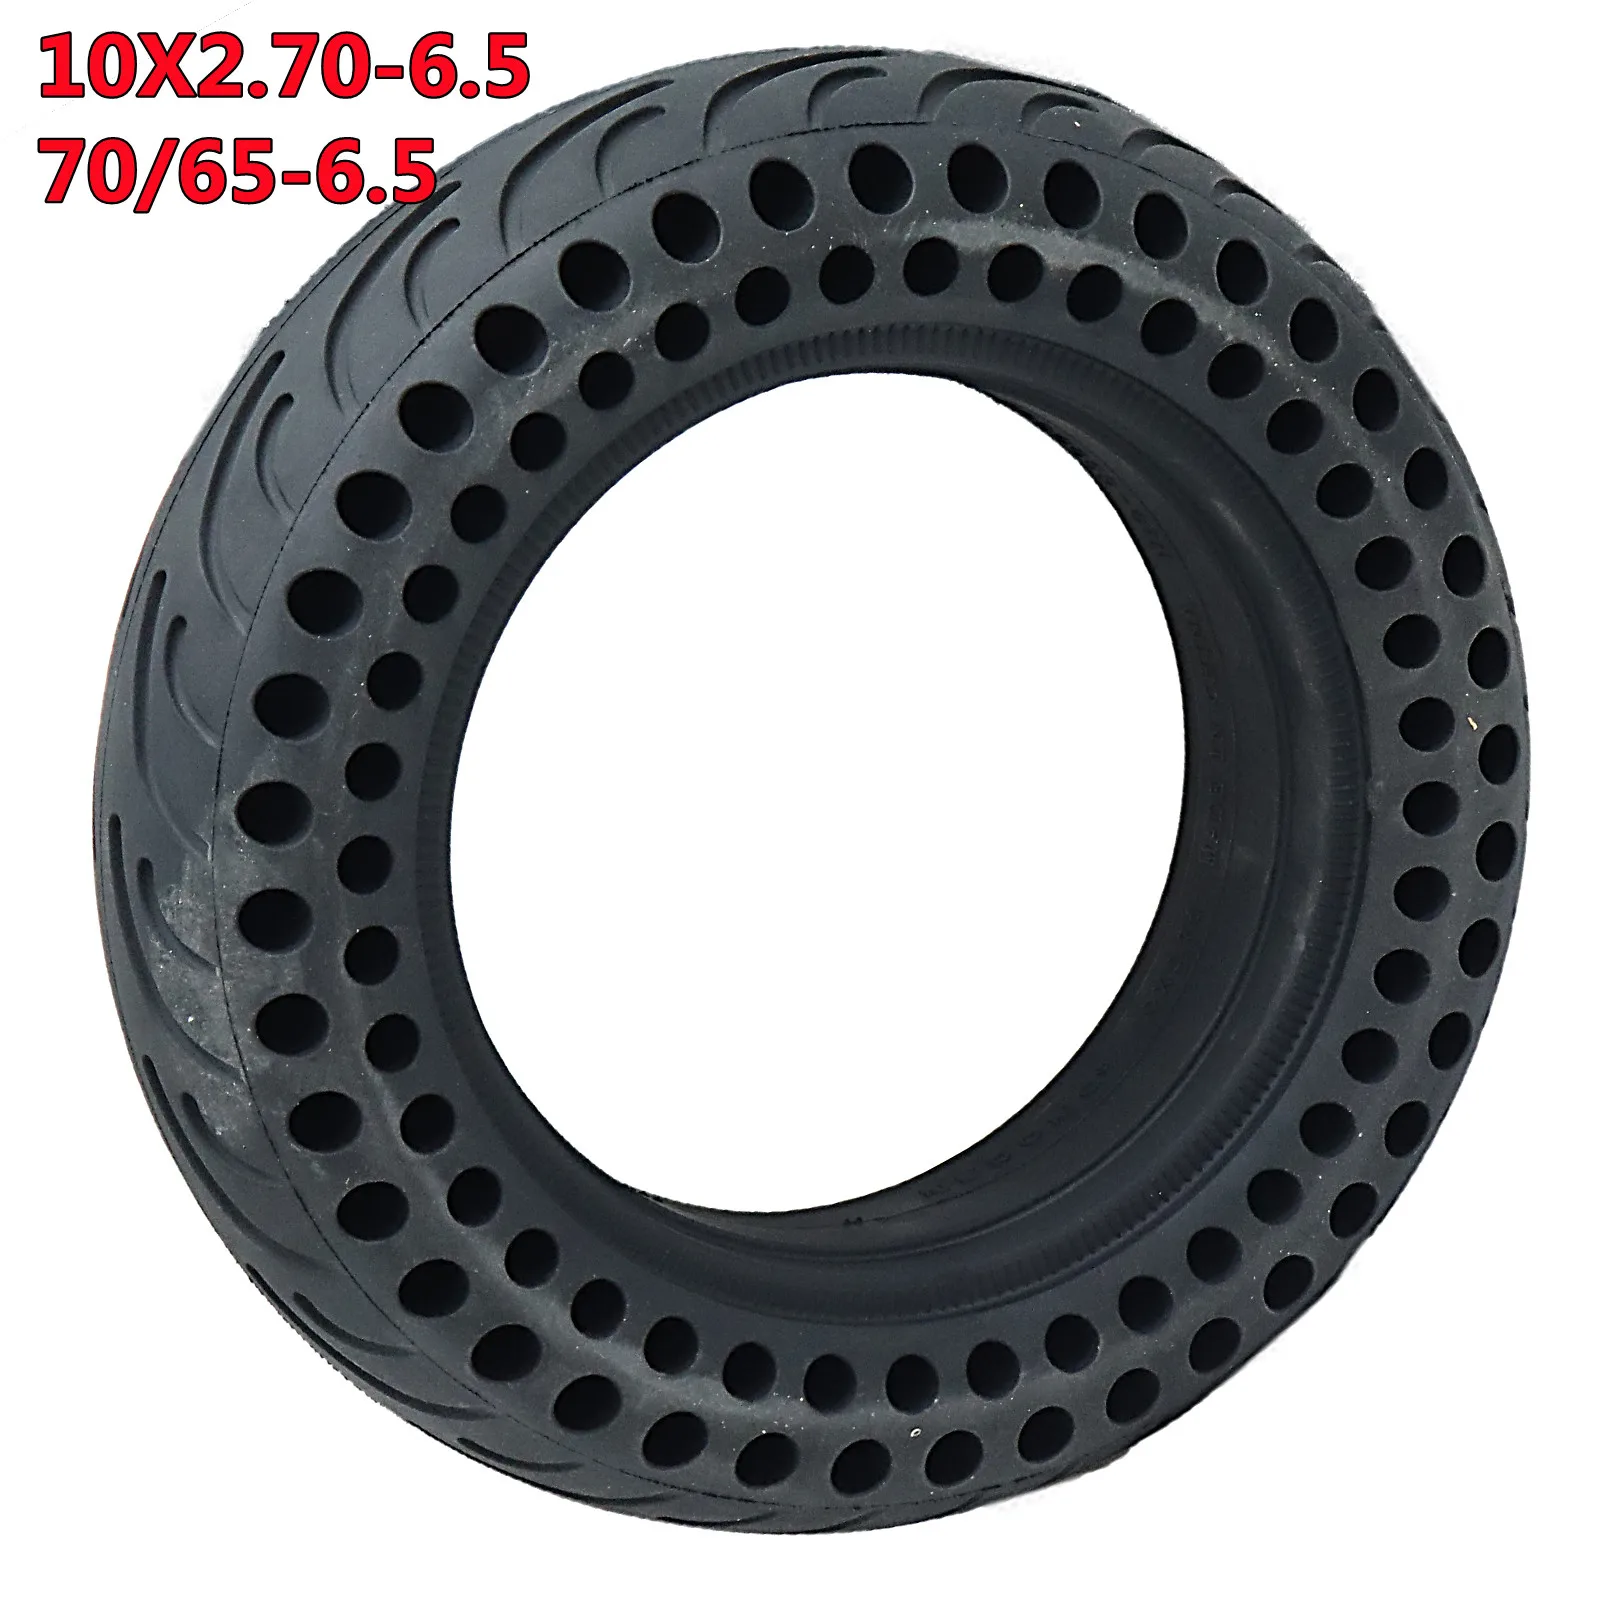 

10 Inch 10x2.70/2.75-6.5 Solid Tire 70/65-6.5 for Speedway 5 Dualtron 3 Electric Scooter Self Balance XiaoMi Mini Pro